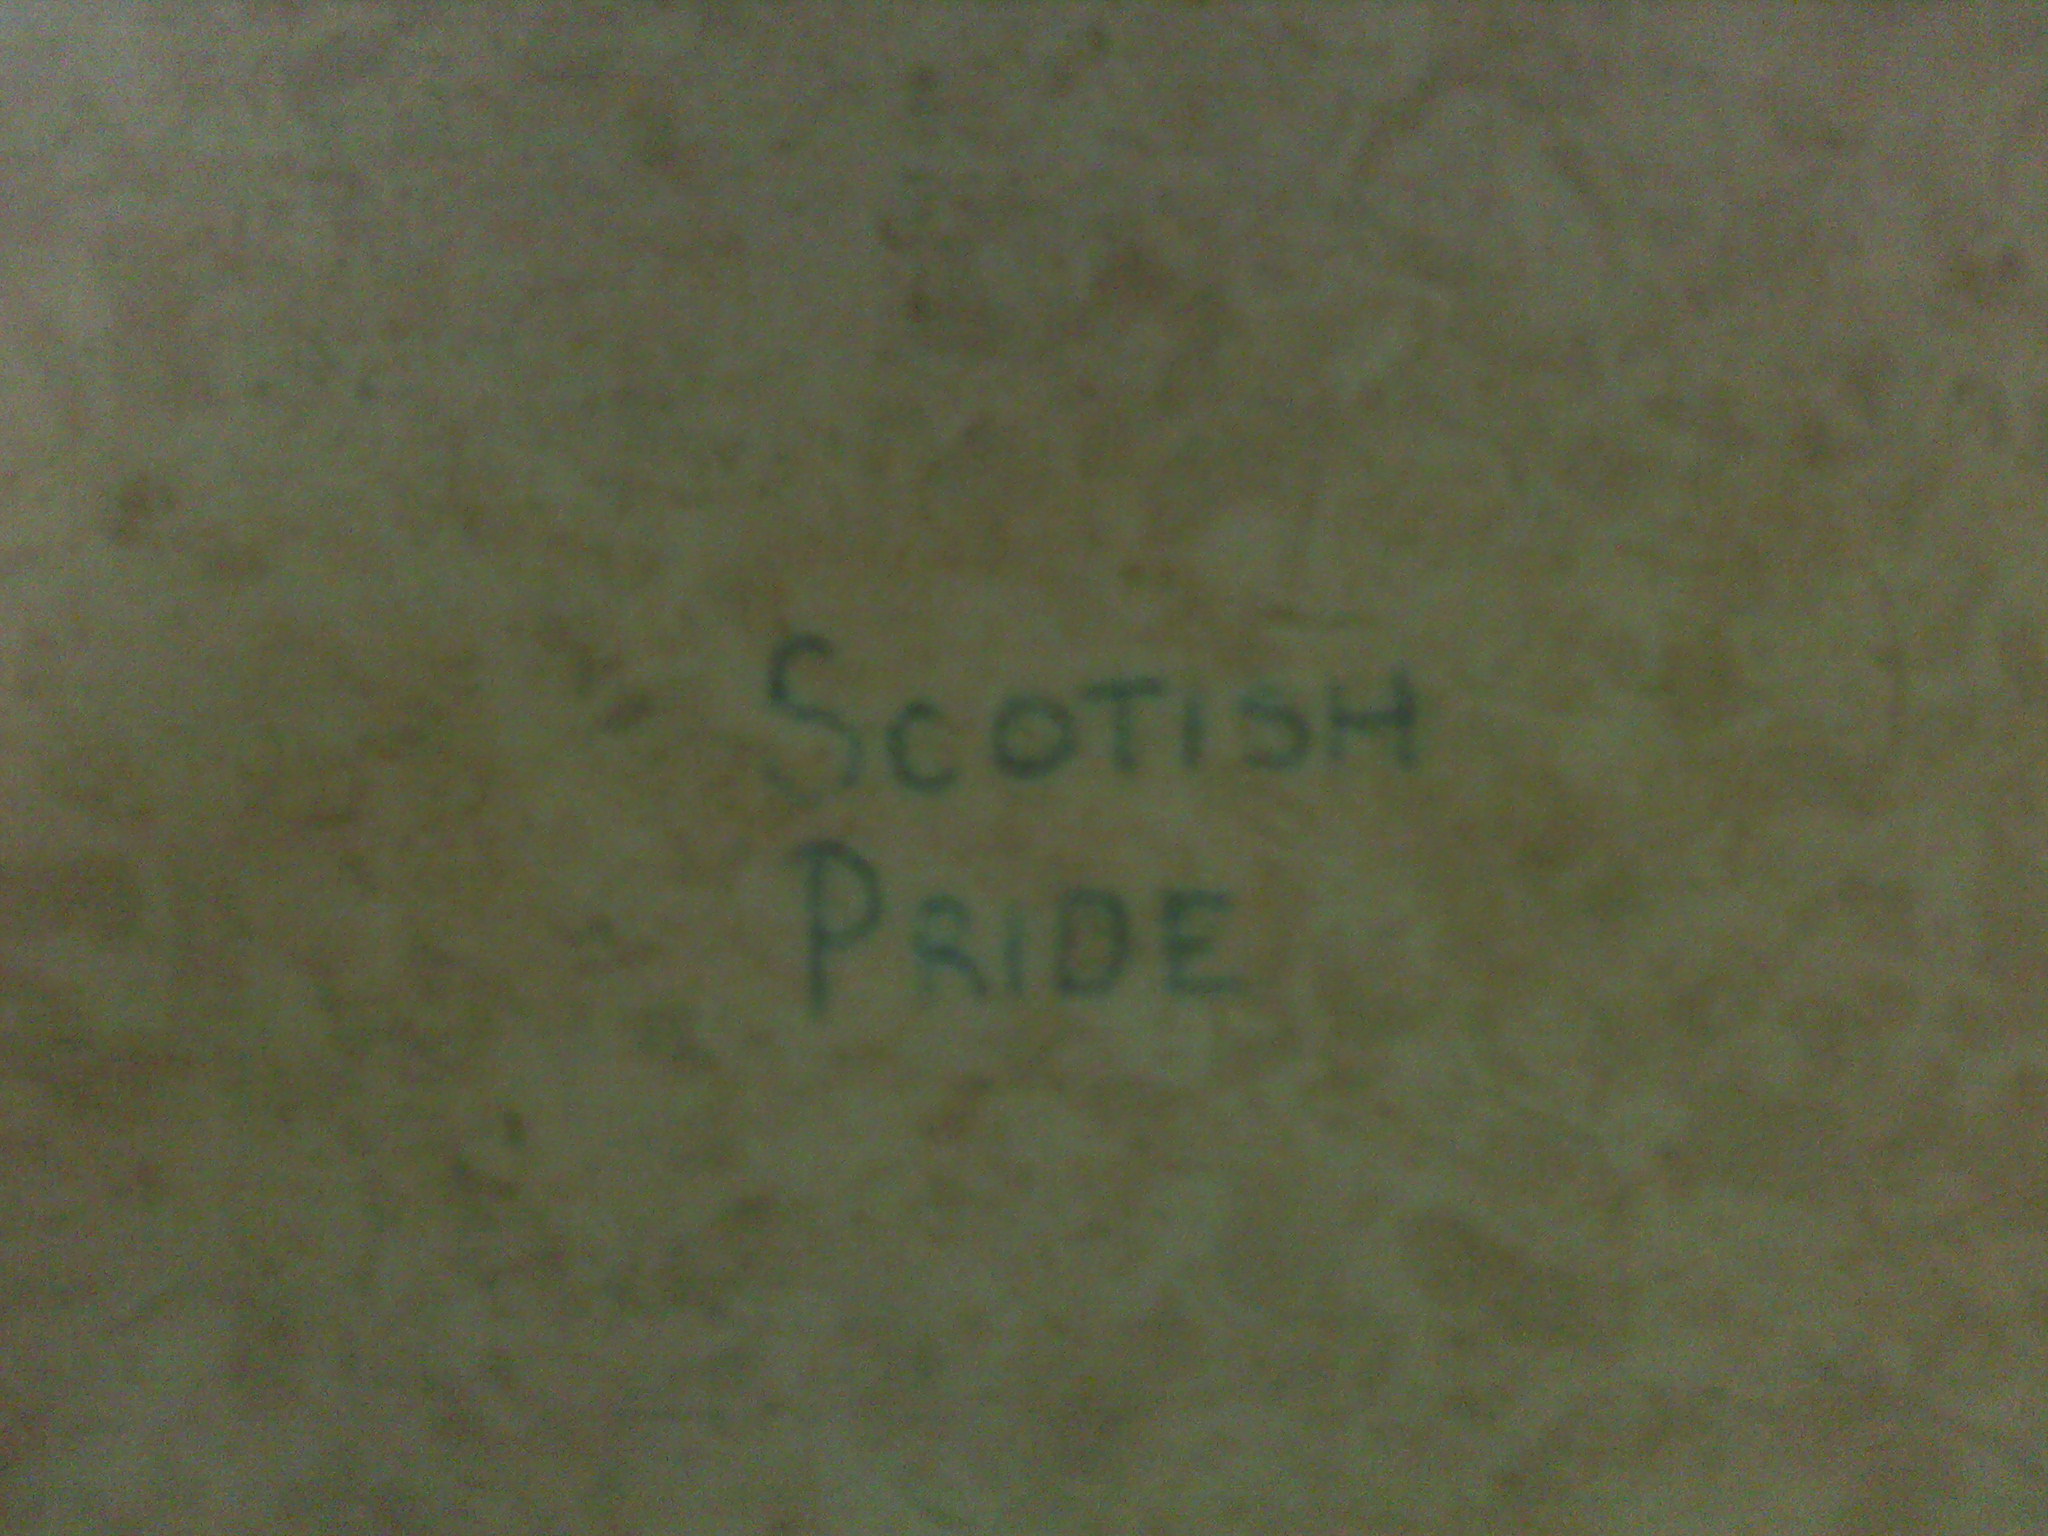 On the bathroom stall at my work. In all fairness, he must have been drunk, which would make the Scots pretty proud just for that.